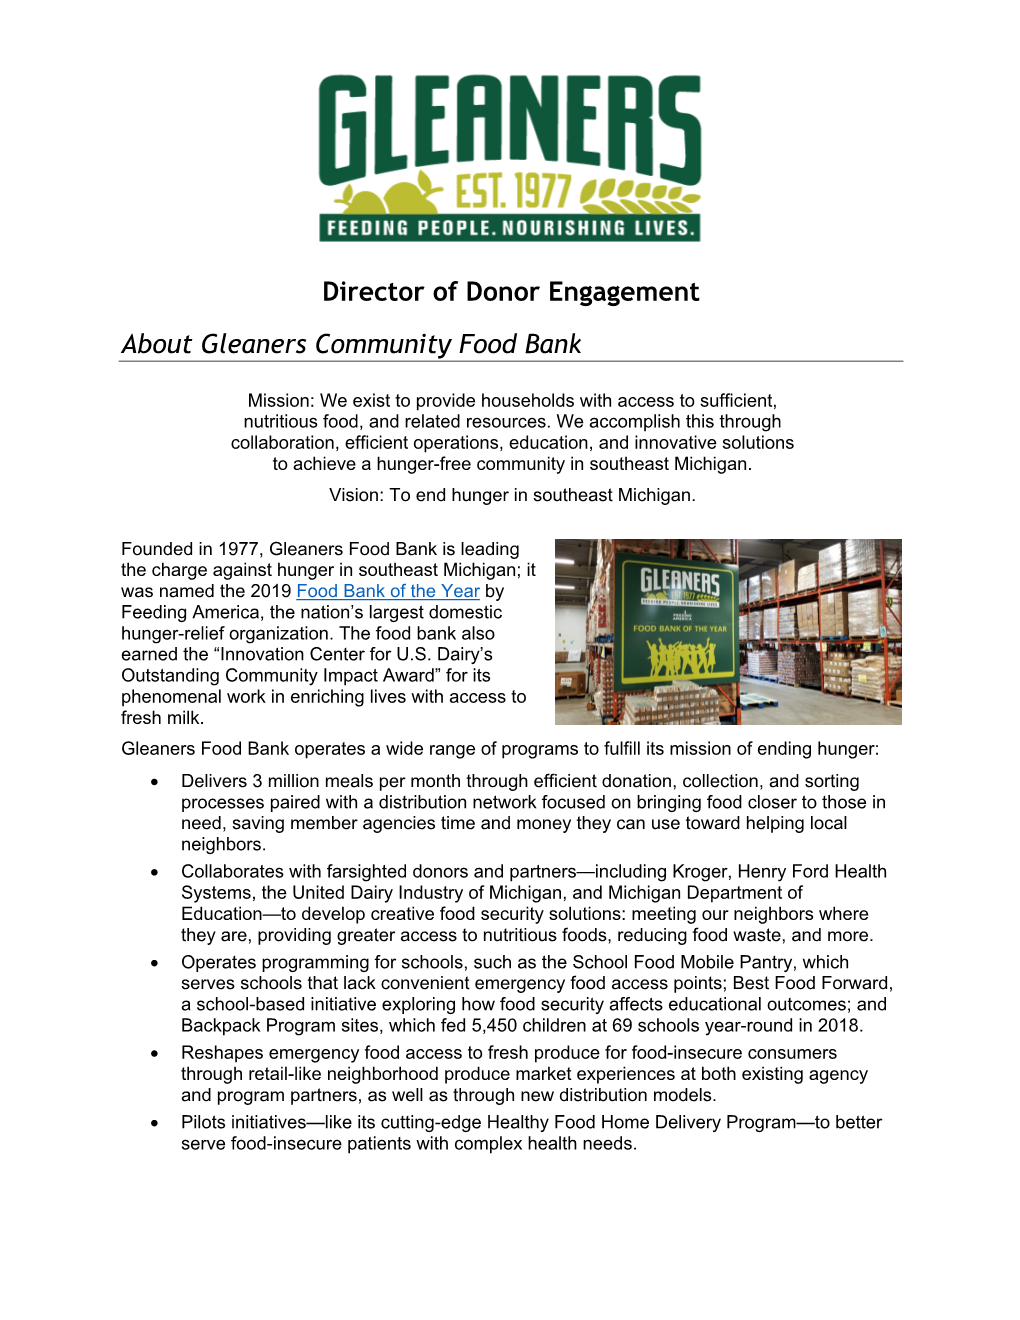 Director of Donor Engagement About Gleaners Community Food Bank